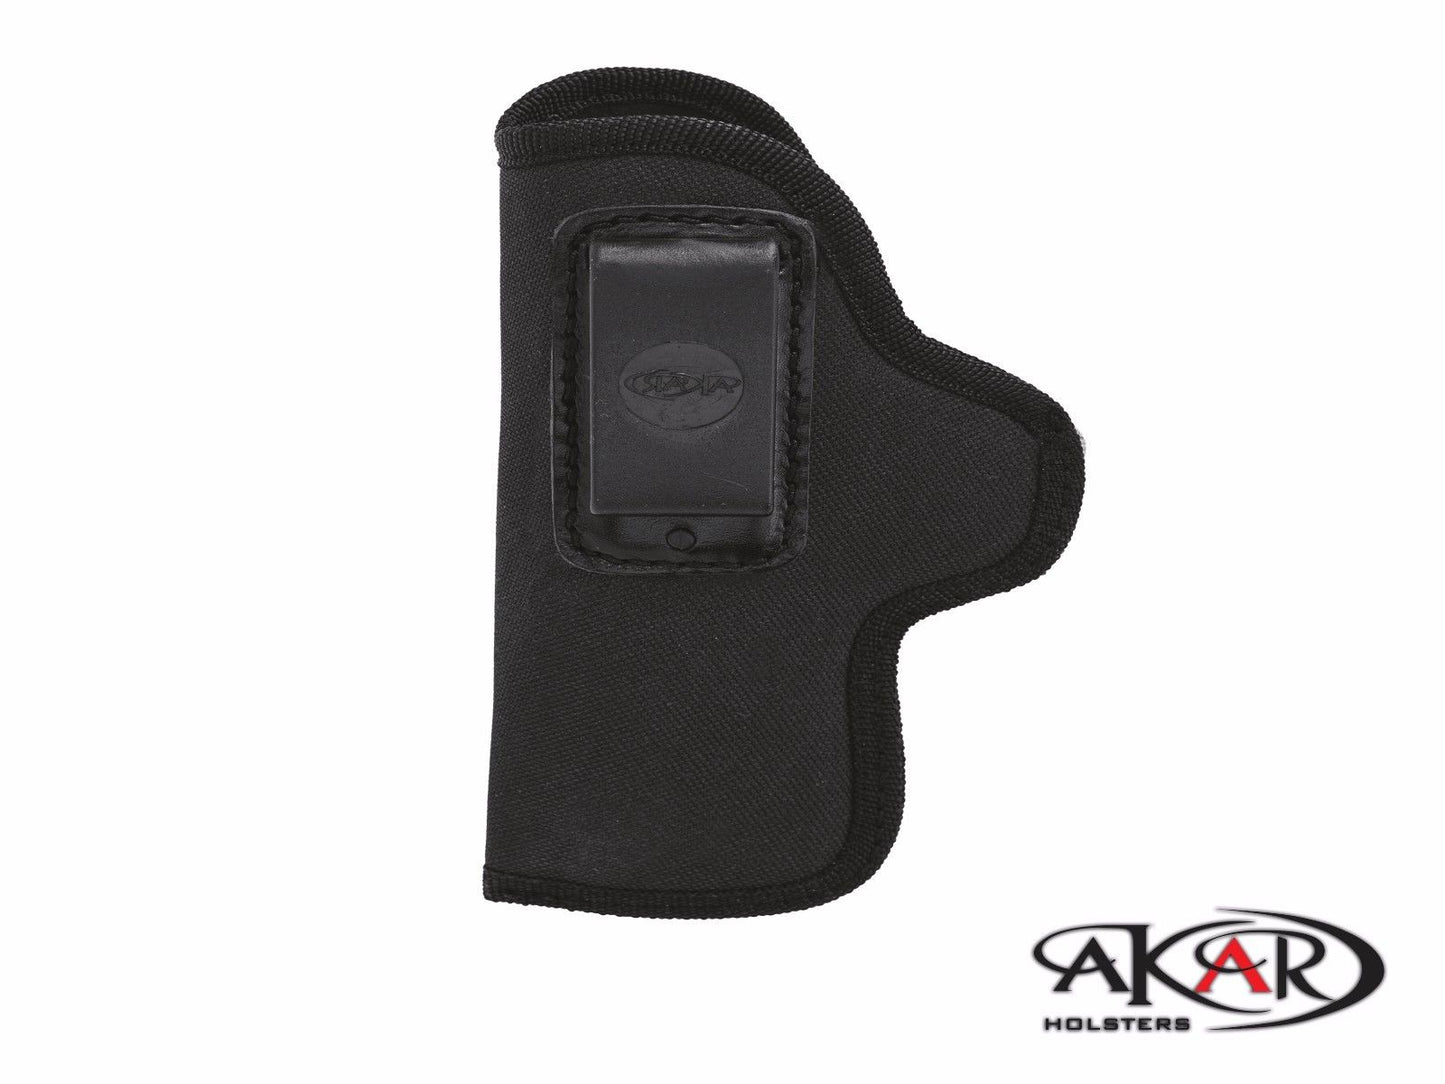 Smith & Wesson M&P Shield Plus Concealed Carry Nylon IWB-Inside The Waistband Clip Pistol